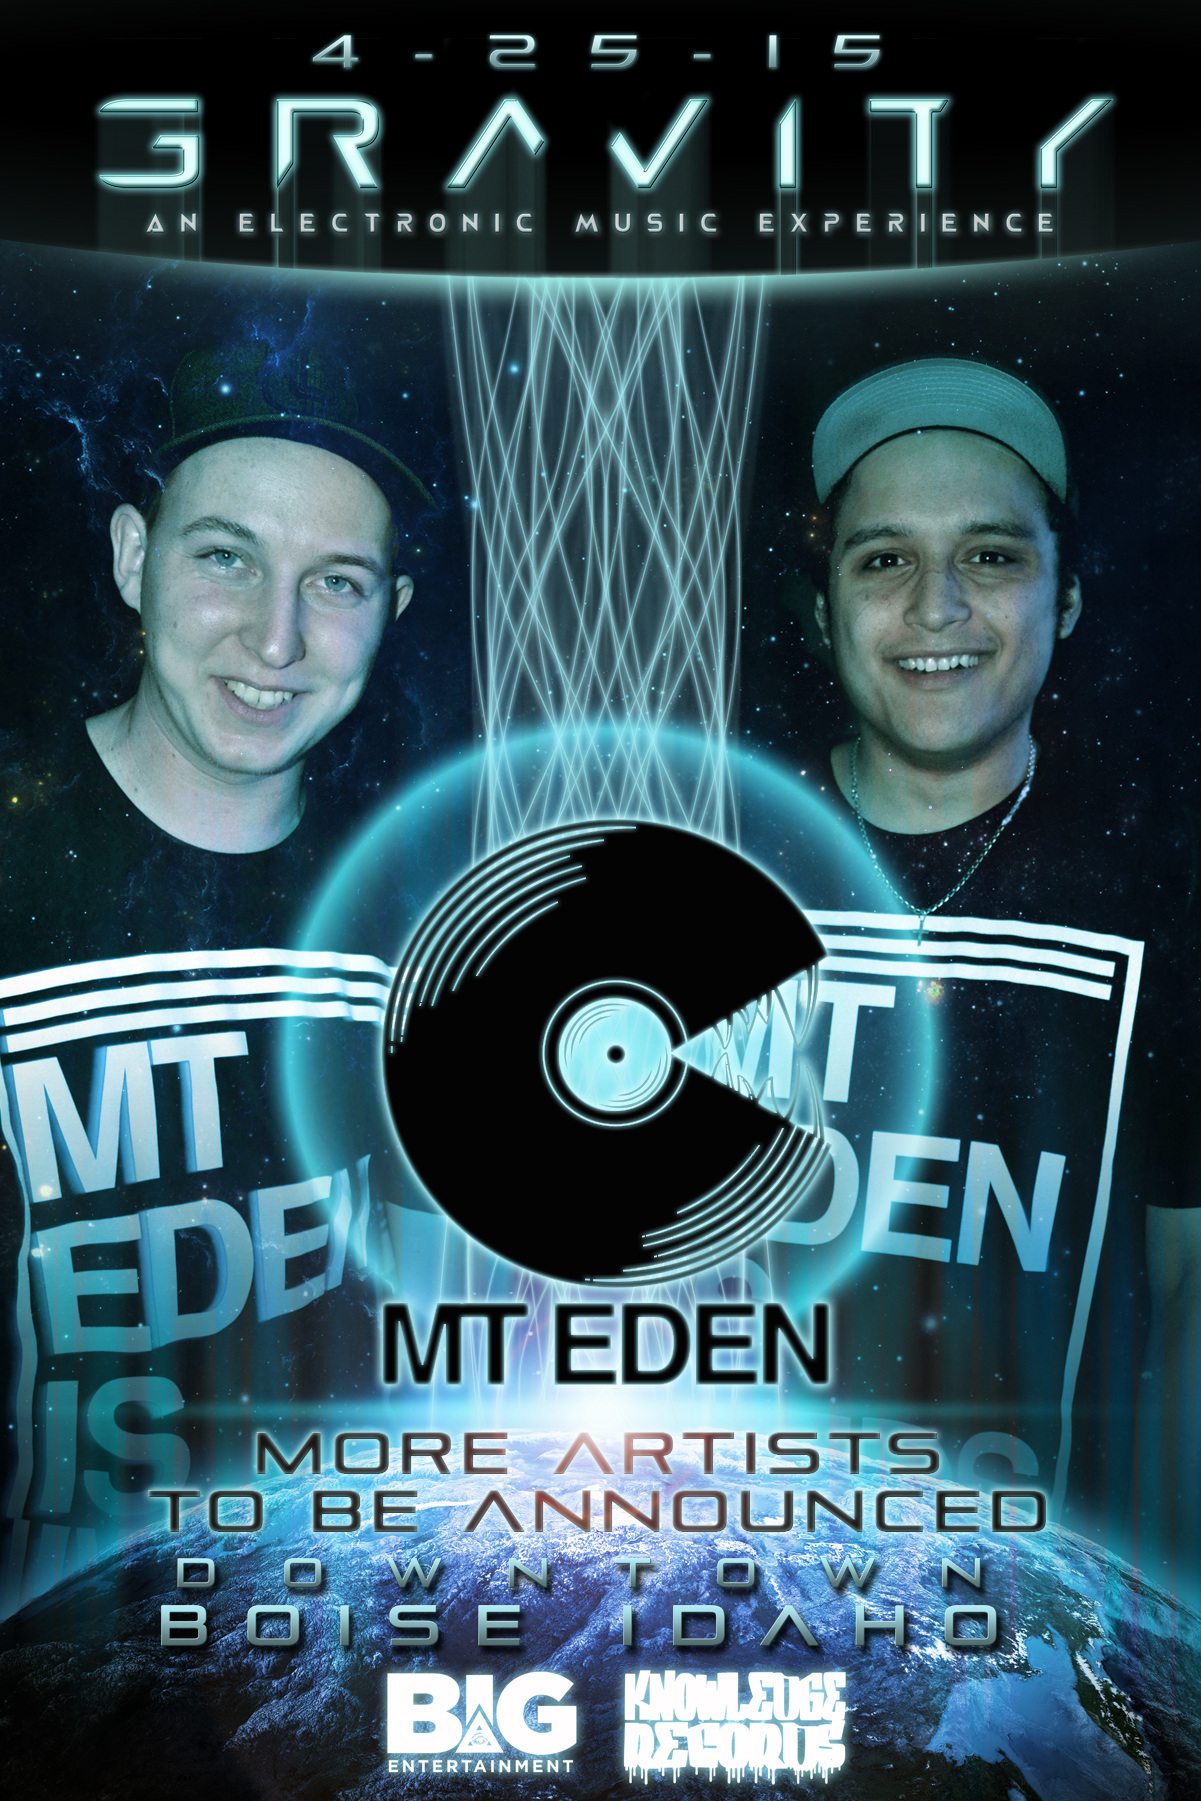 Renowned dubstep duo Mt. Eden is the first of four national headliner announcements for Gravity Boise.